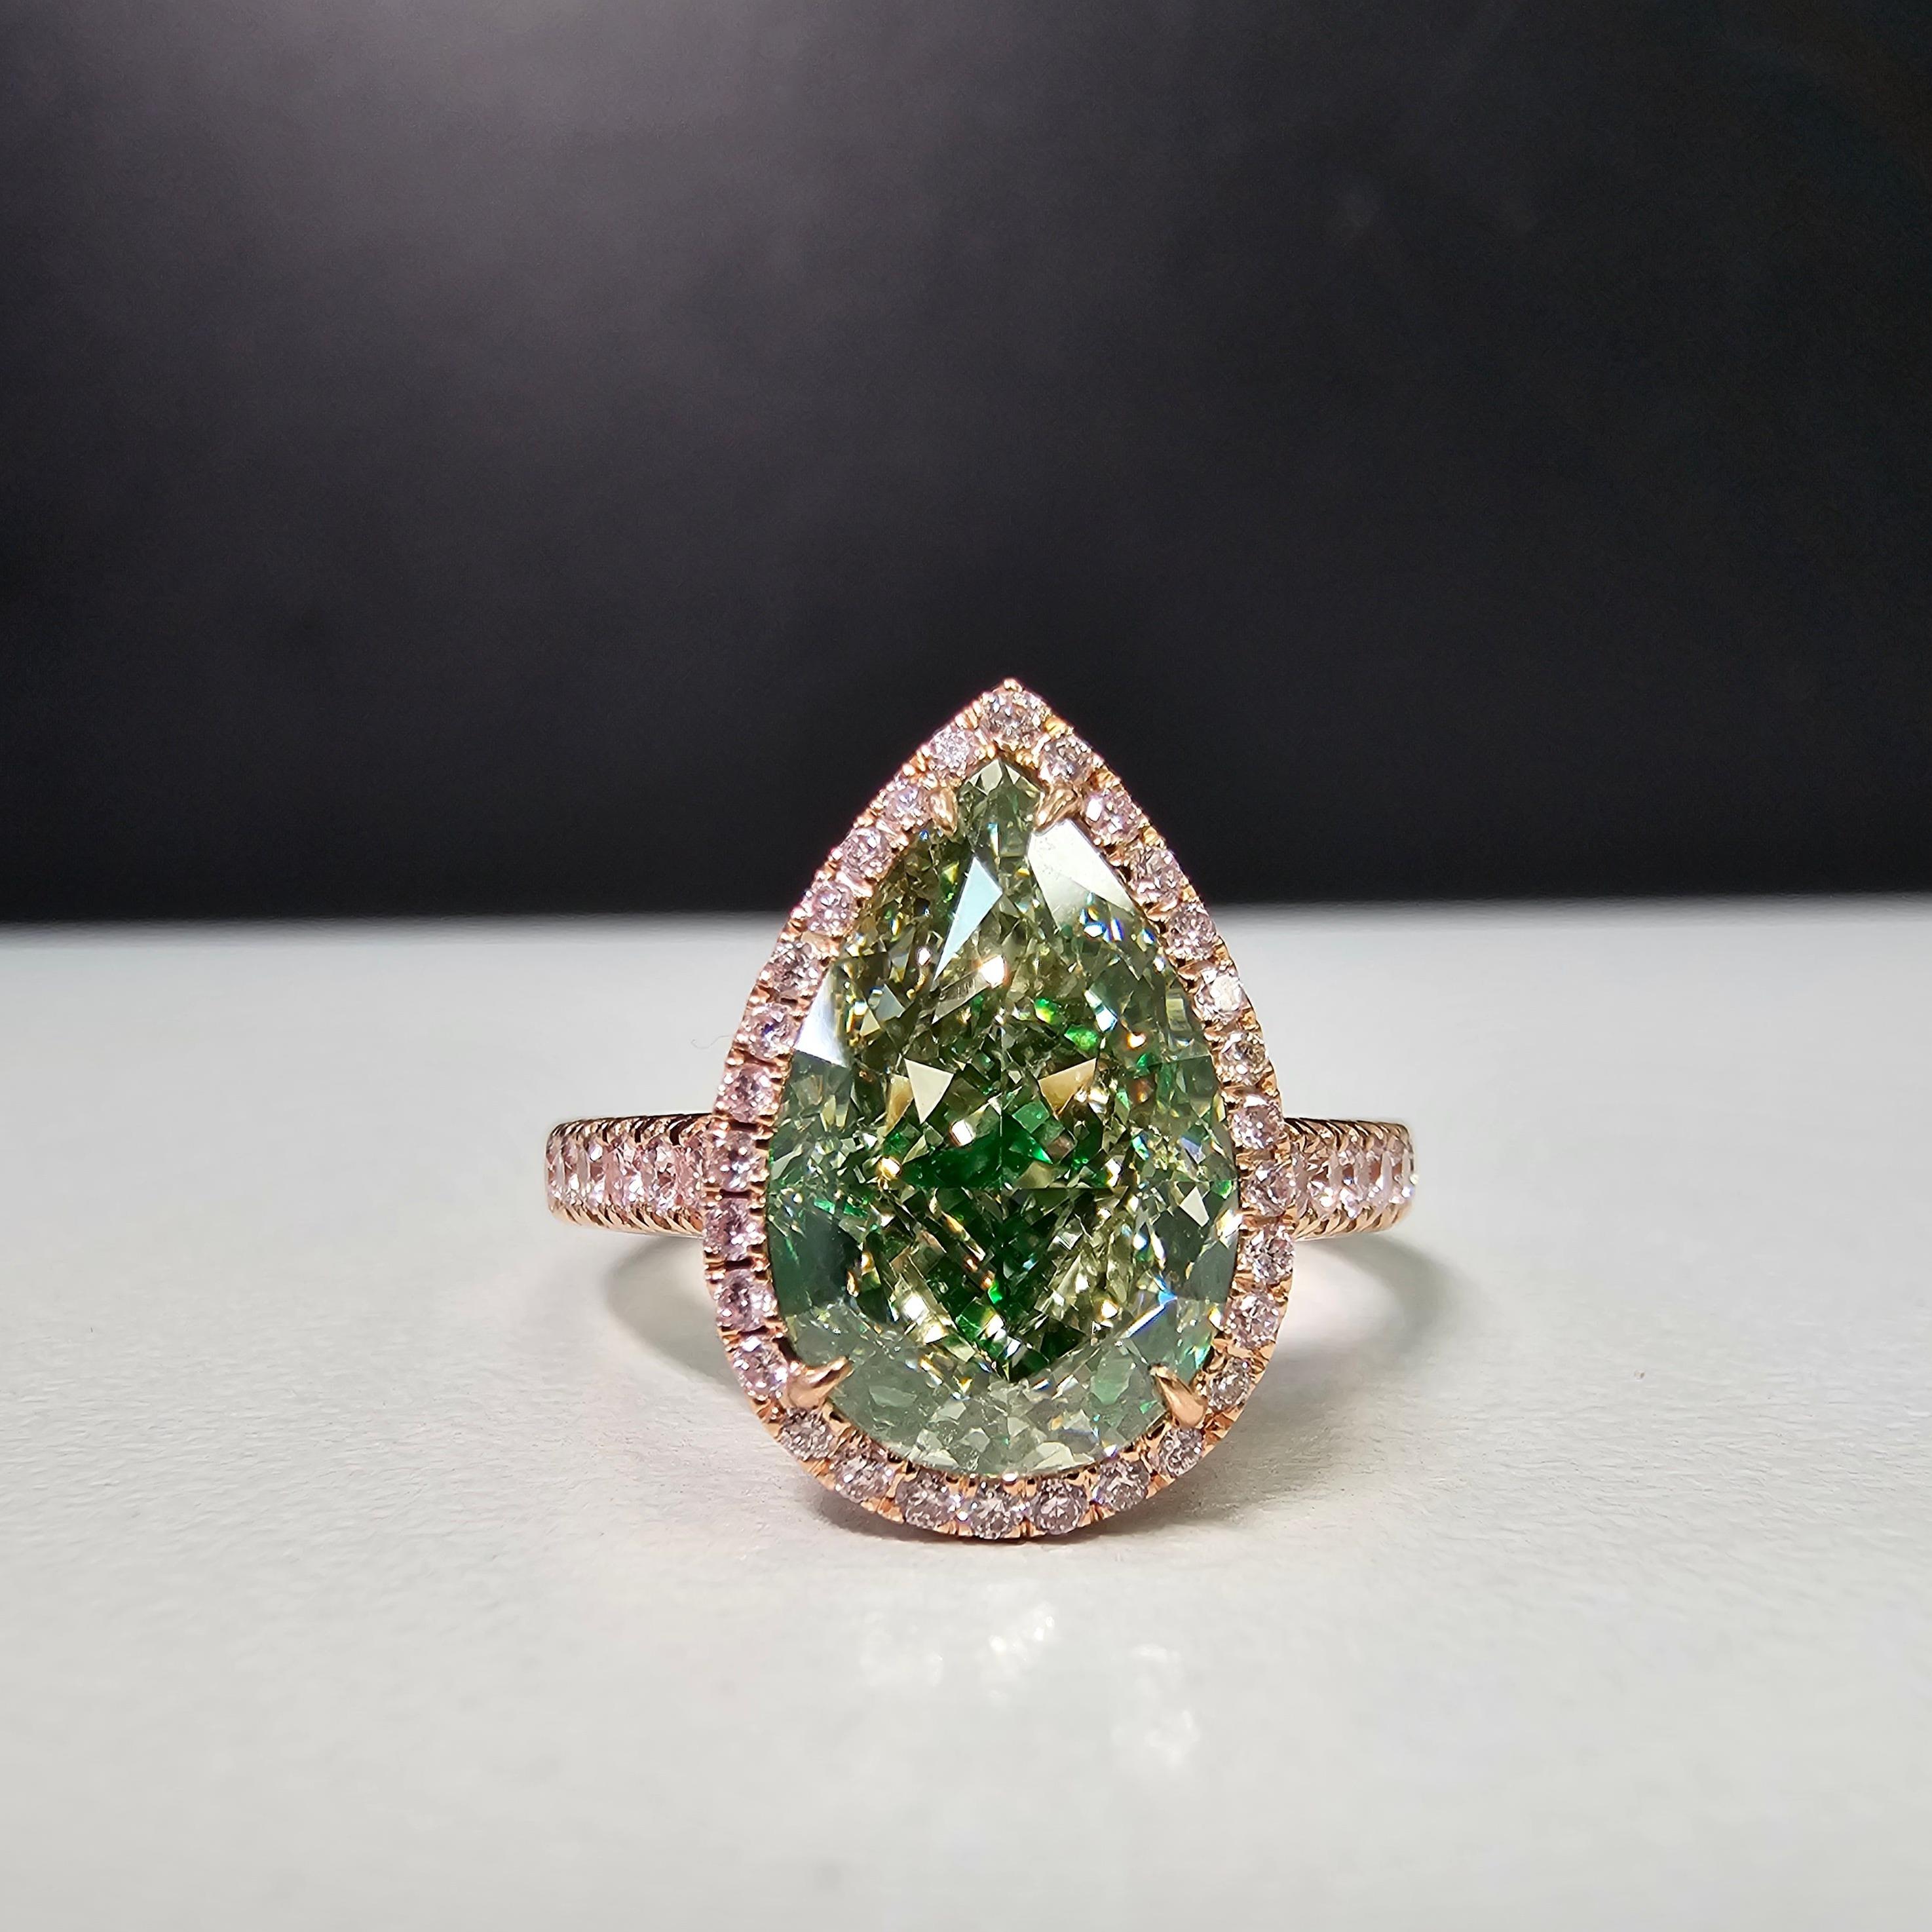 Our new line of diamonds with flavors of green in them set in a ring with green painted enamel under the diamond to make it appear as a pure green diamond. The diamond is 100% natural and GIA certified, but the ring is colored underneath the stone